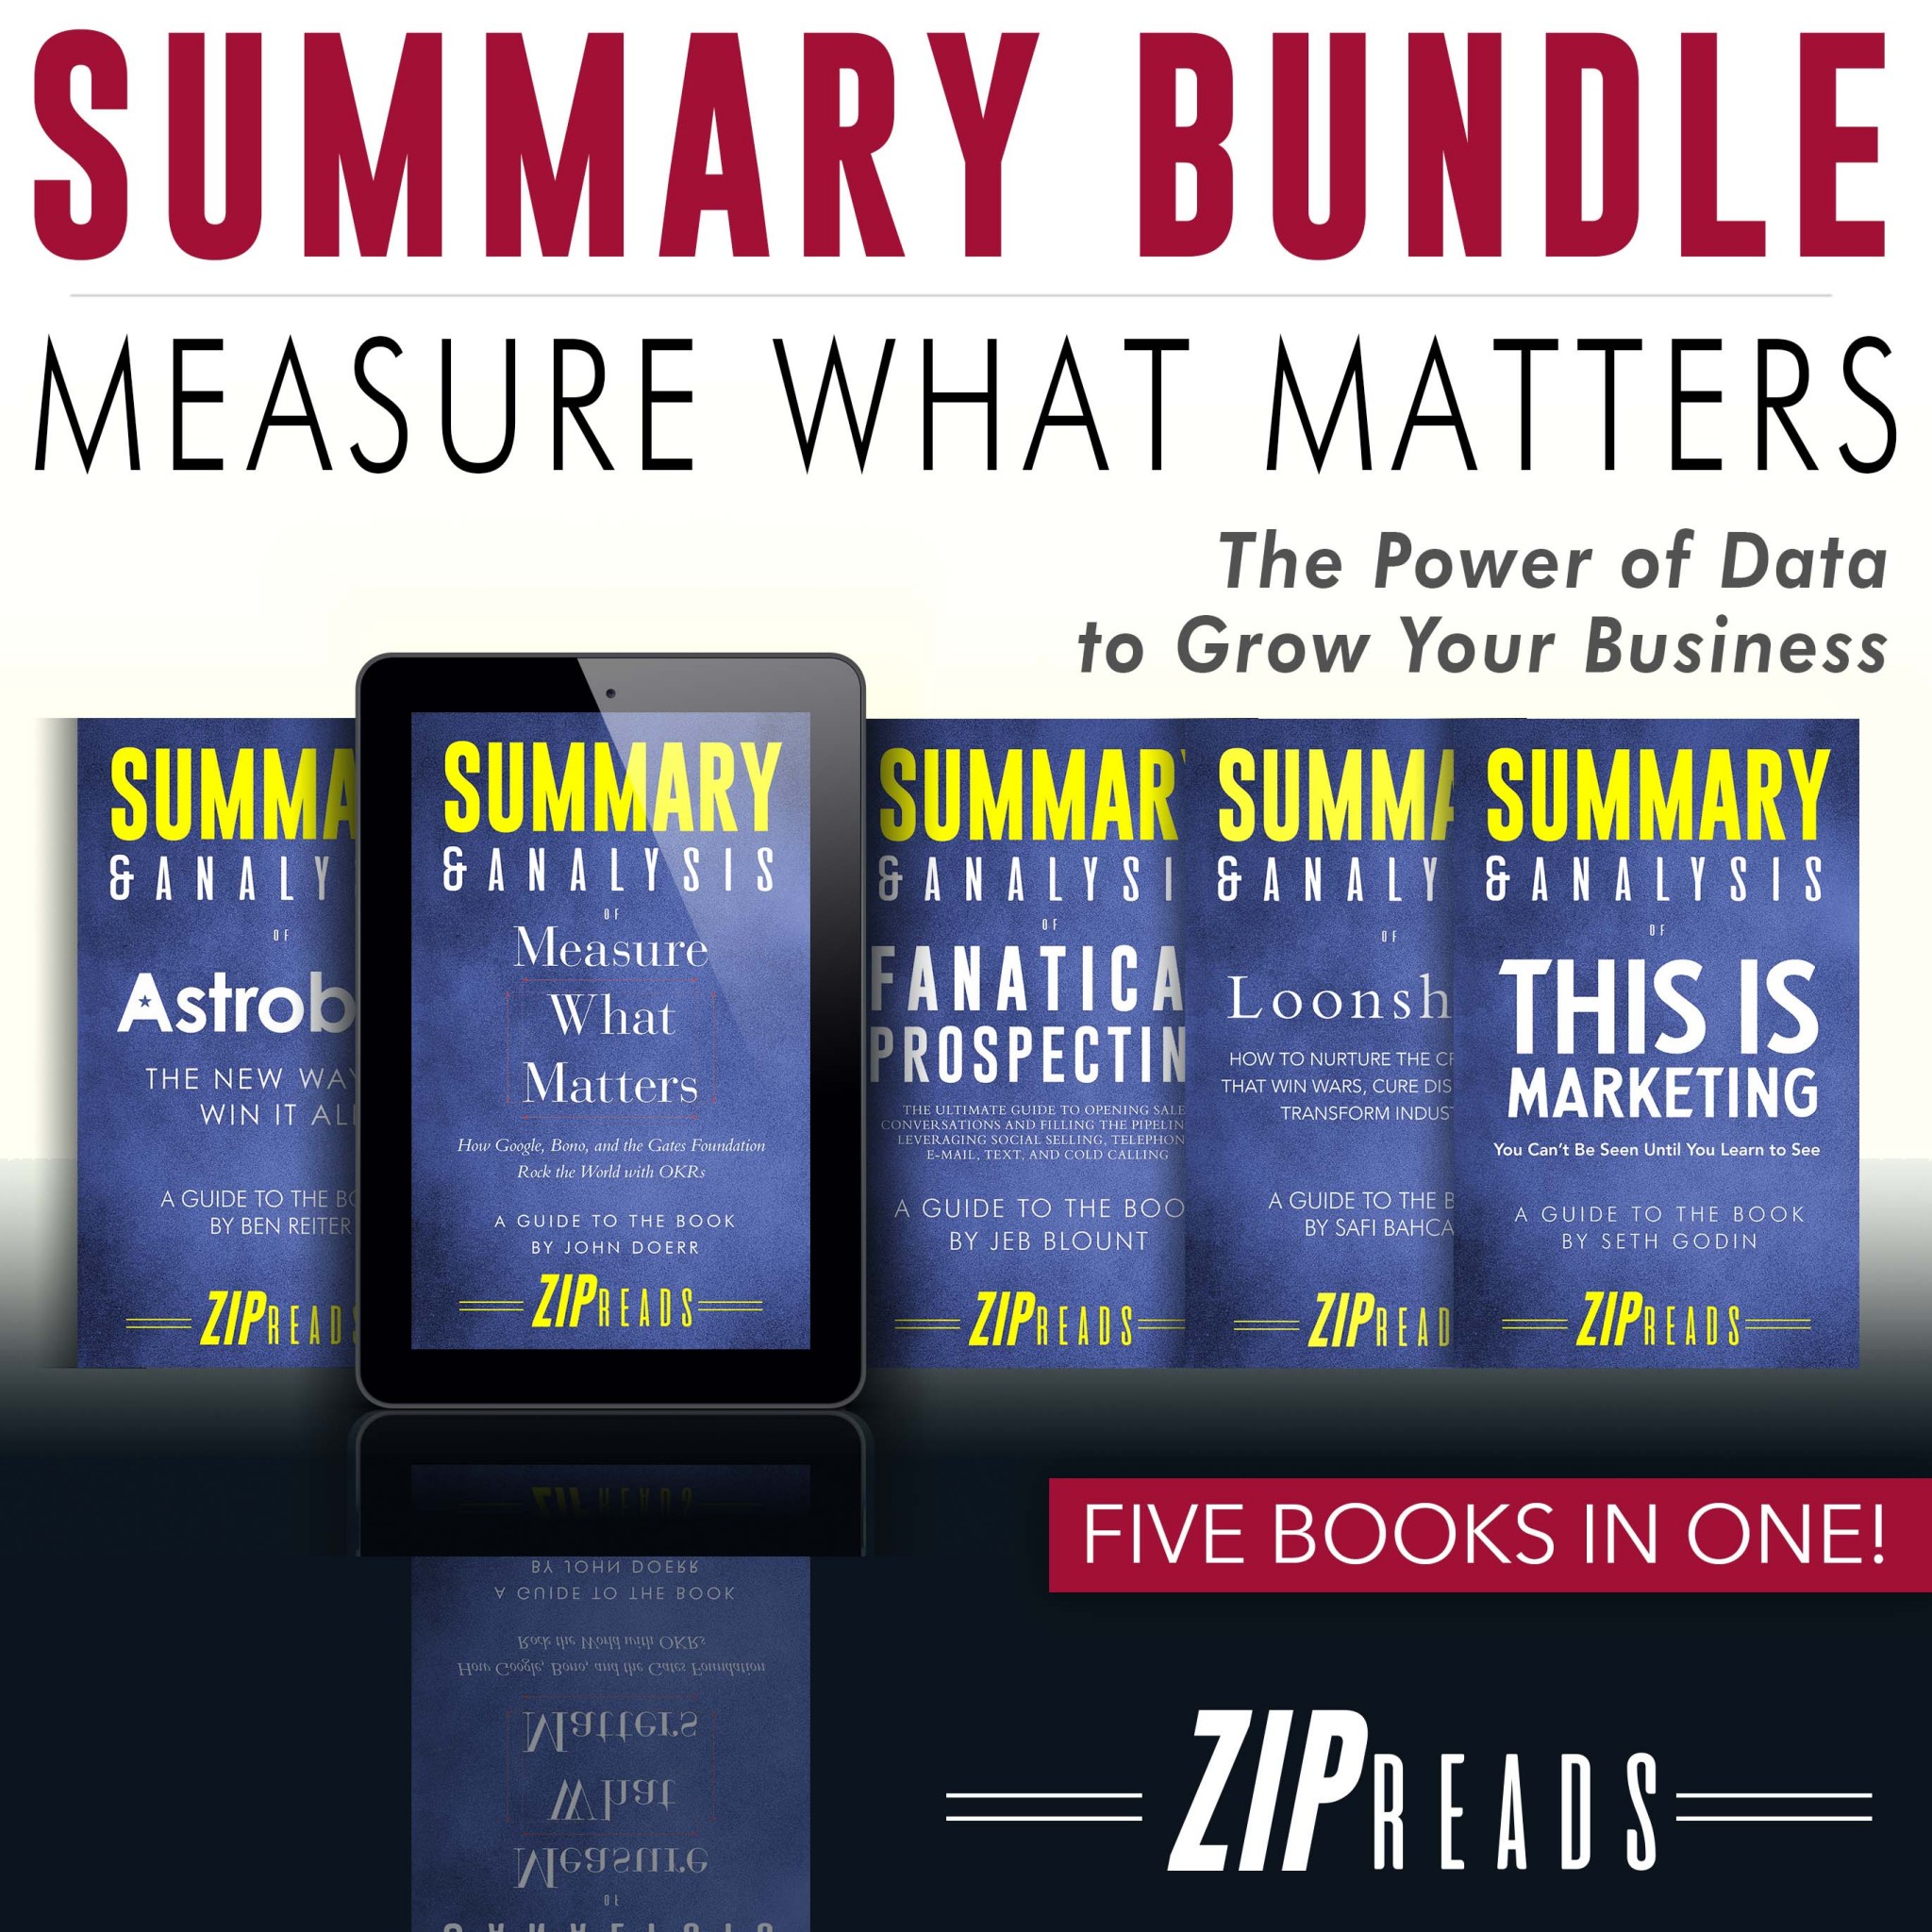 measure what matters summary bundle